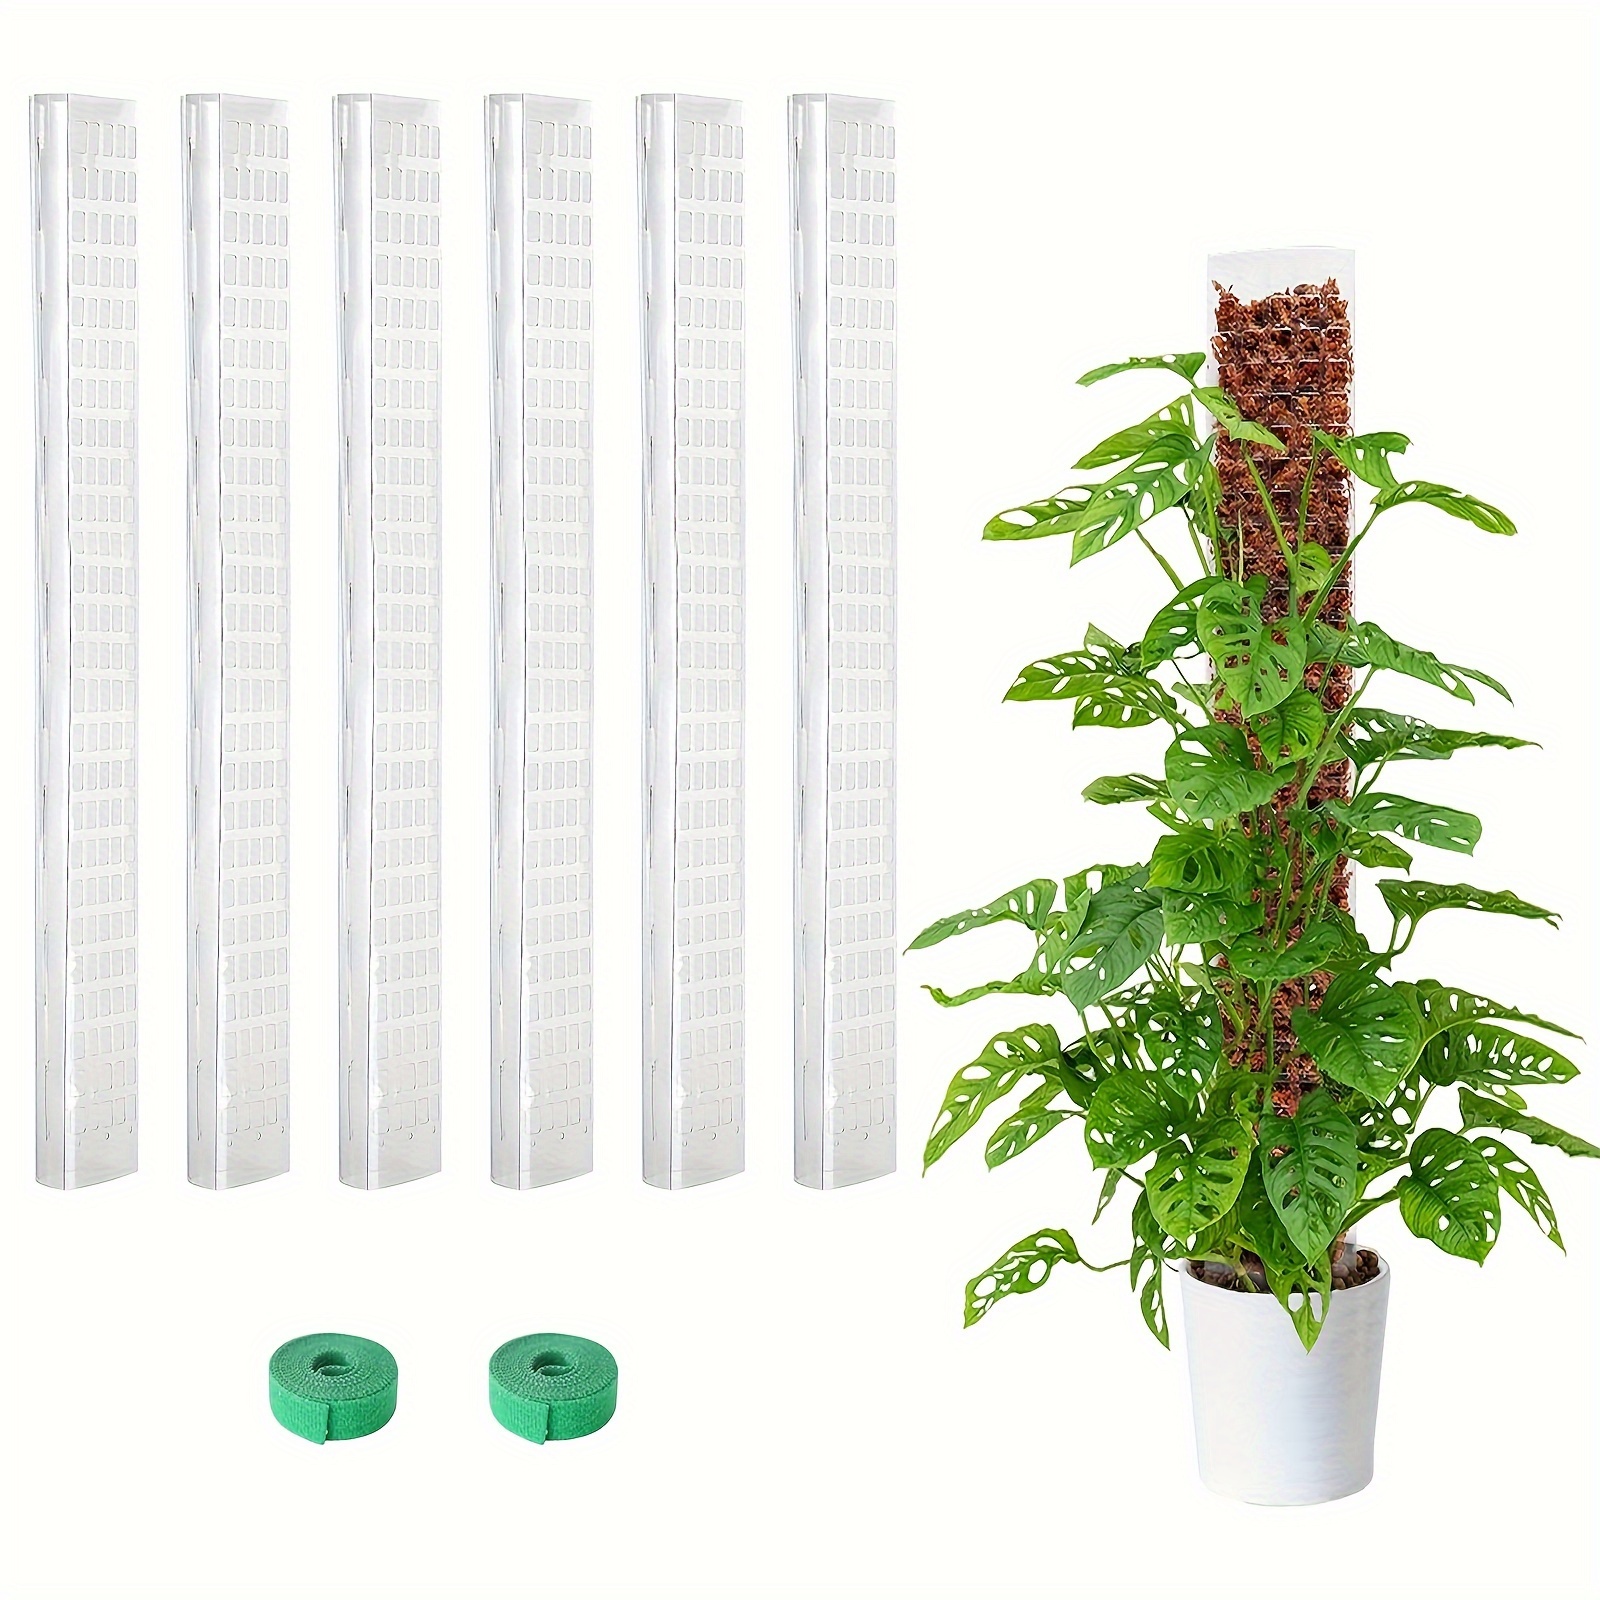 

6 Packs, Plastic Moss Poles For Plants 6x 24 Moss Poles For Climbing Plants Indoor Plant Support With D-shape Design Enhance Growth And Greenery